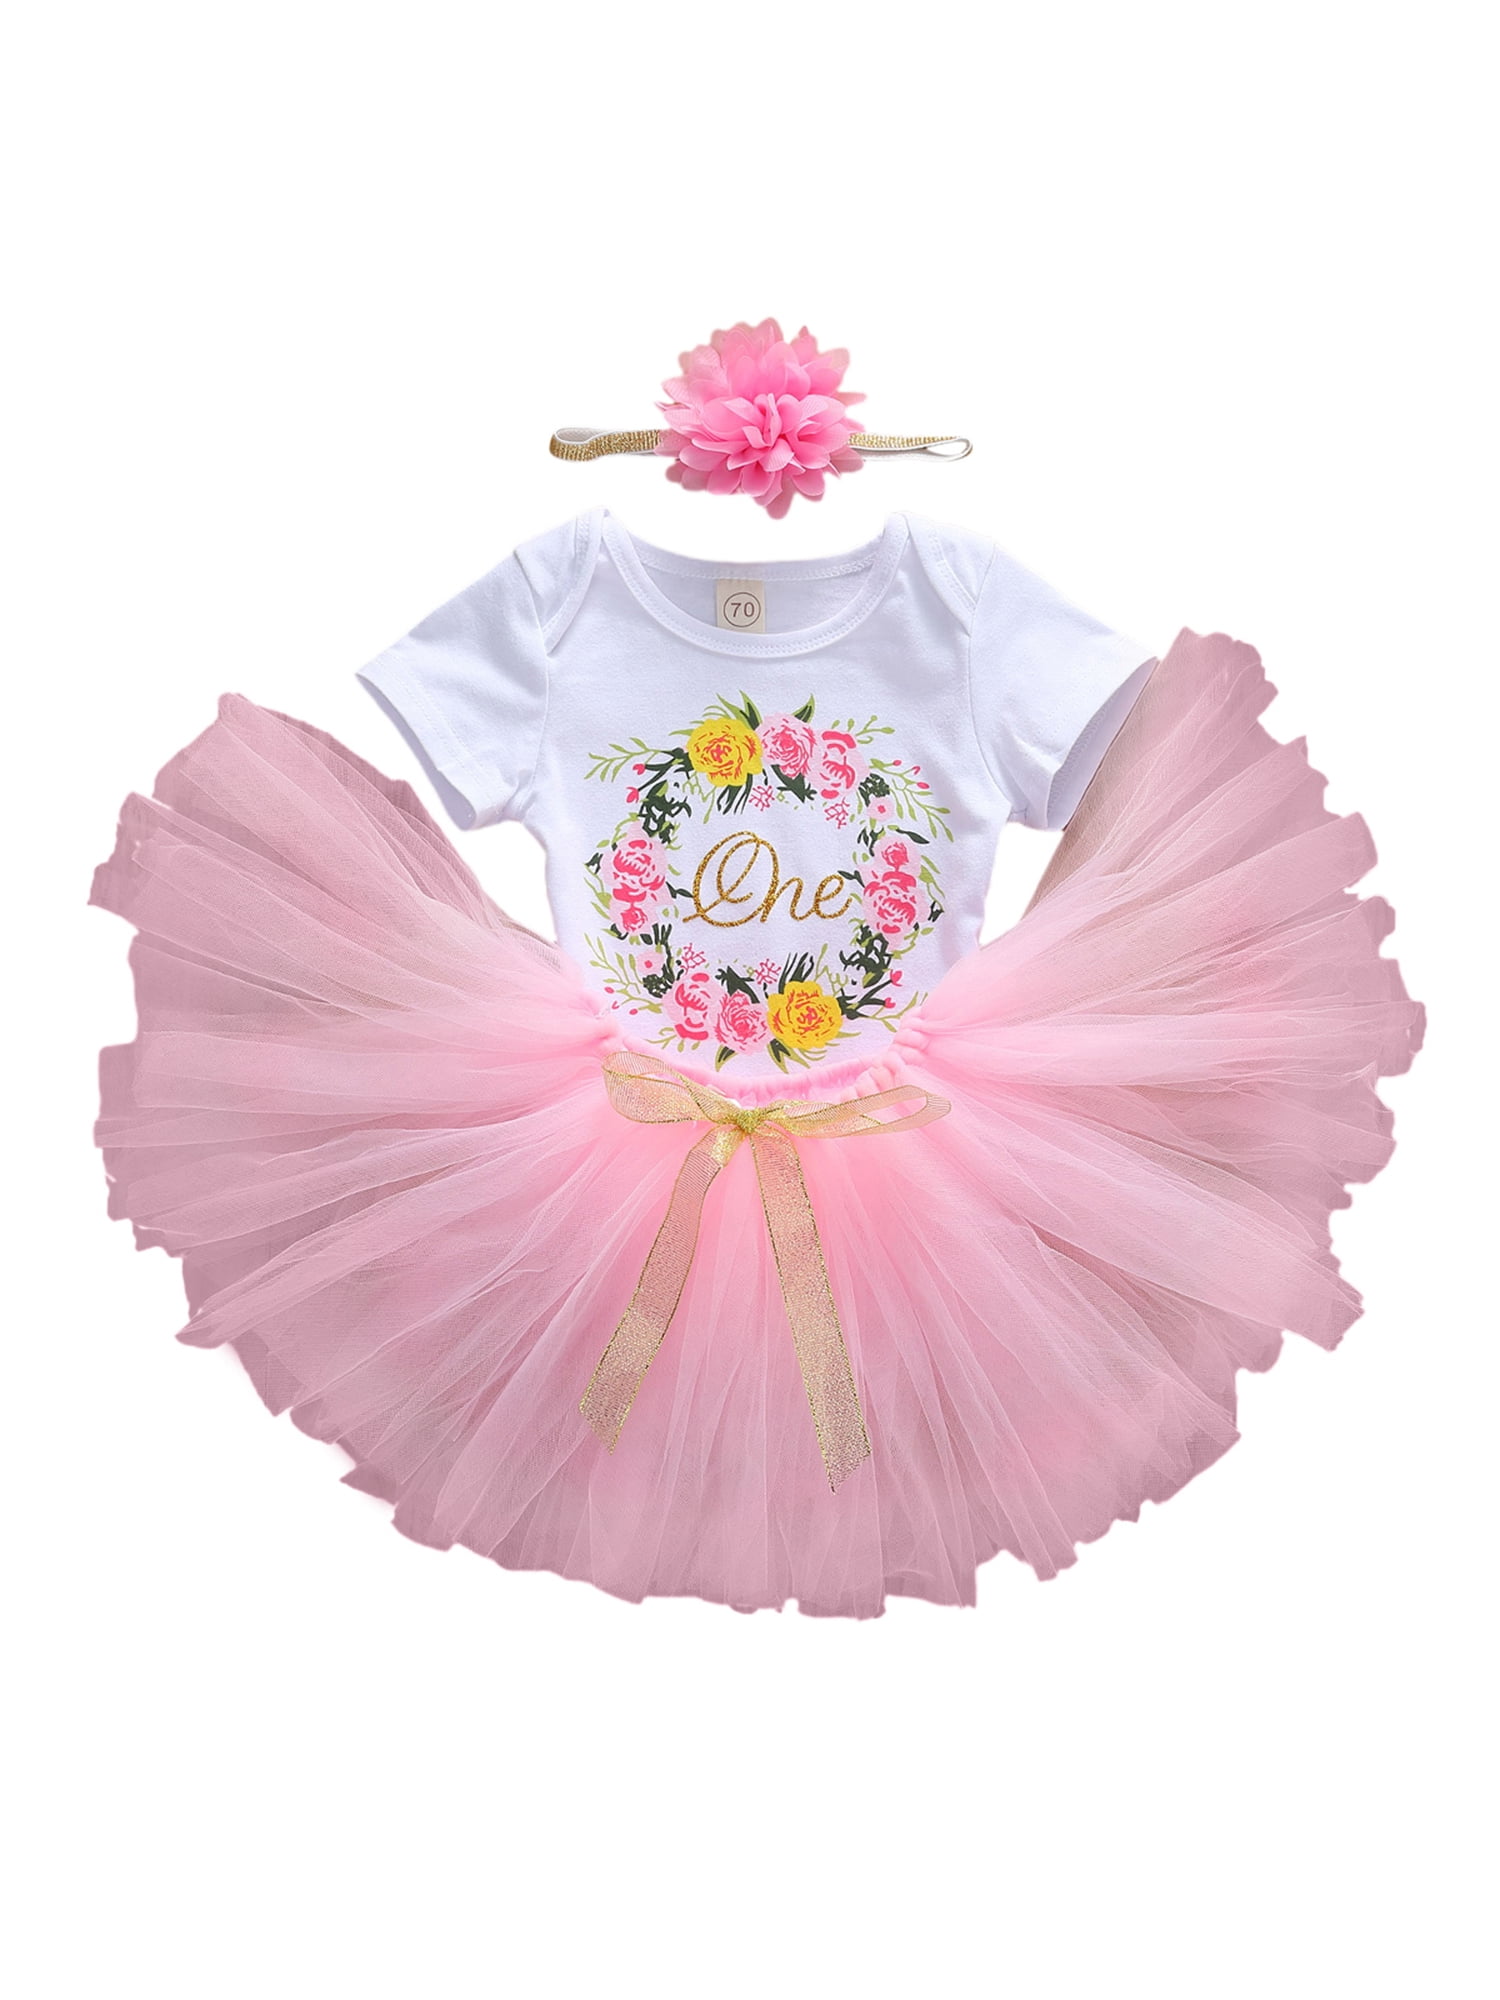 Newborn Infant Baby Girls Summer Clothes Flysleeves Birthday Romper Tutu Skirt One Year Old Outfits